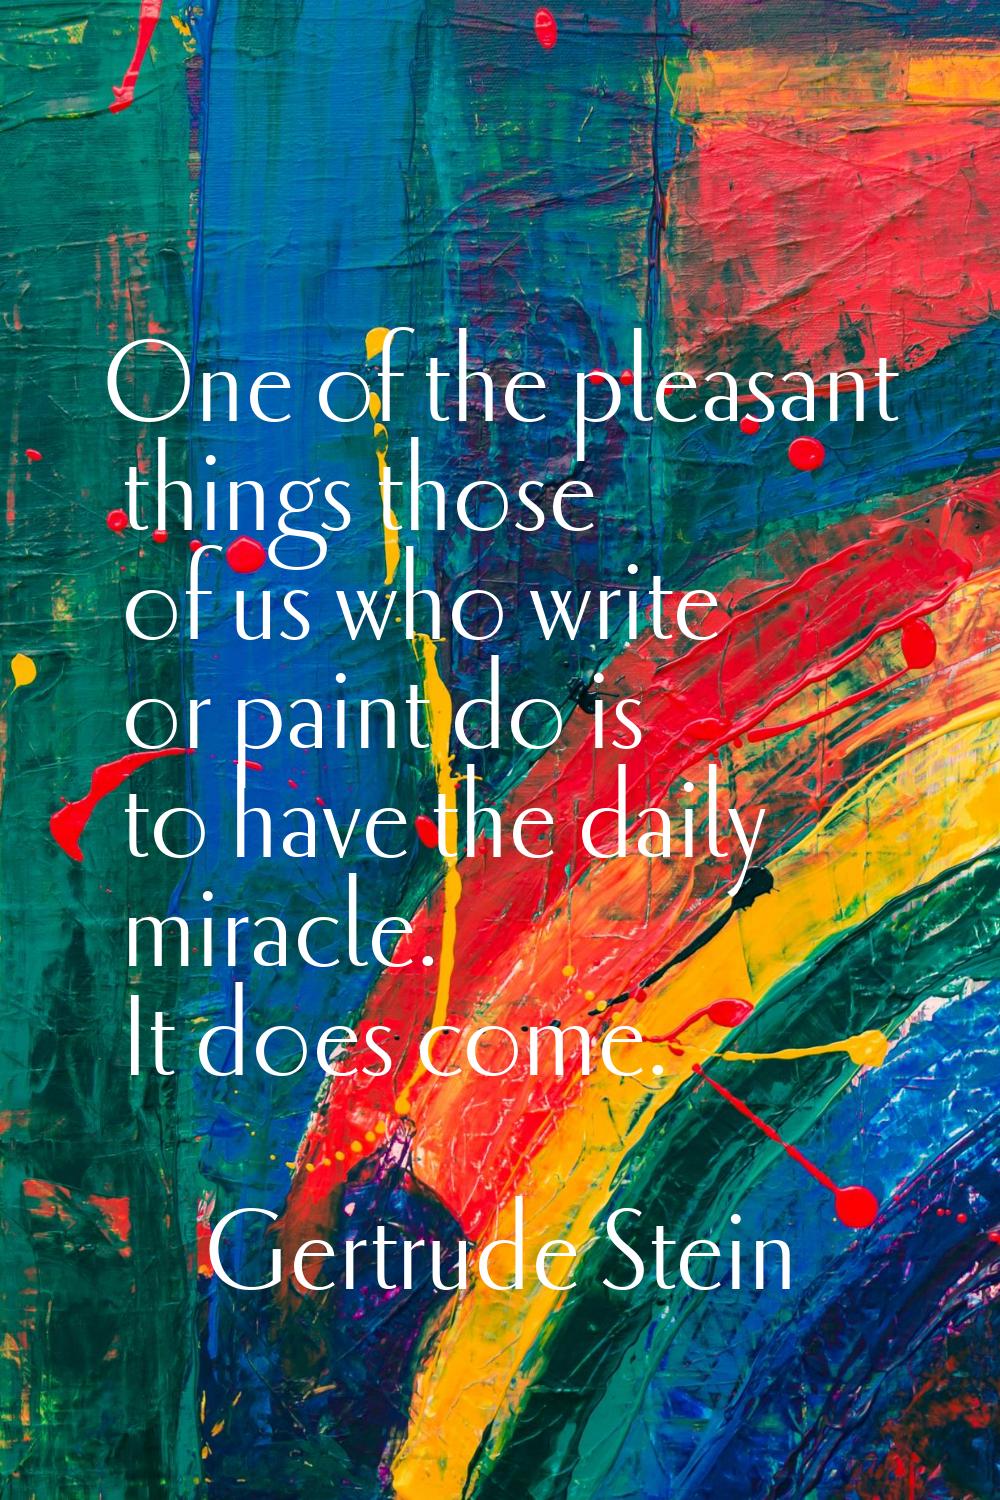 One of the pleasant things those of us who write or paint do is to have the daily miracle. It does 